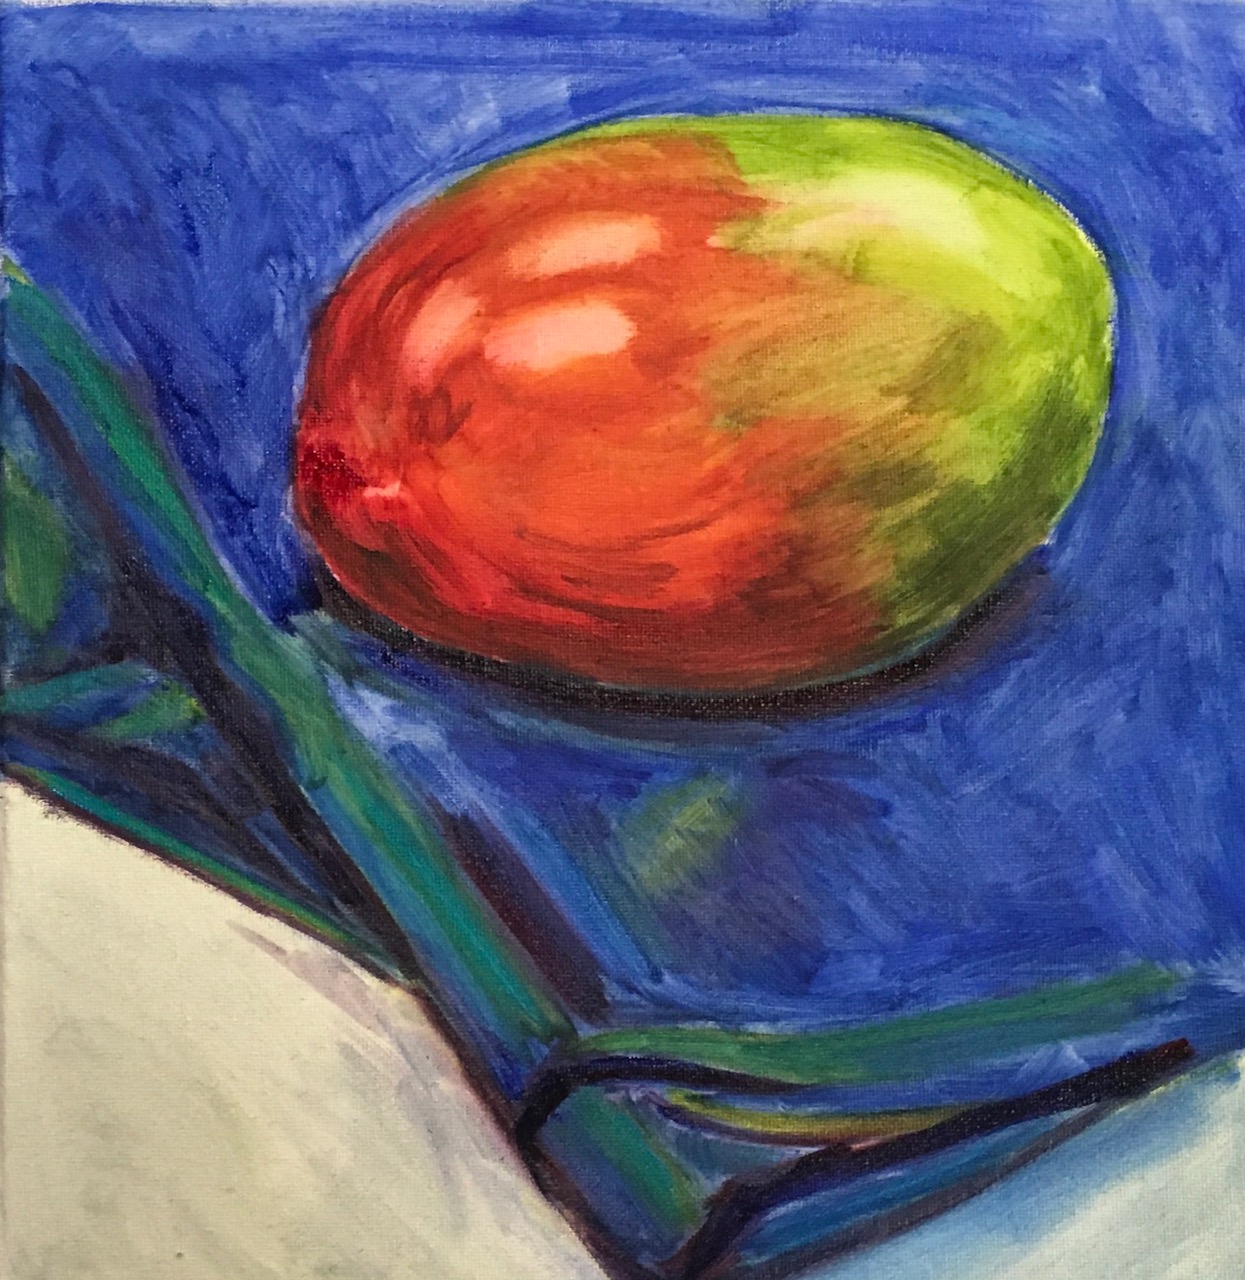 A painting of a mango on a blue surface next to a white surface.